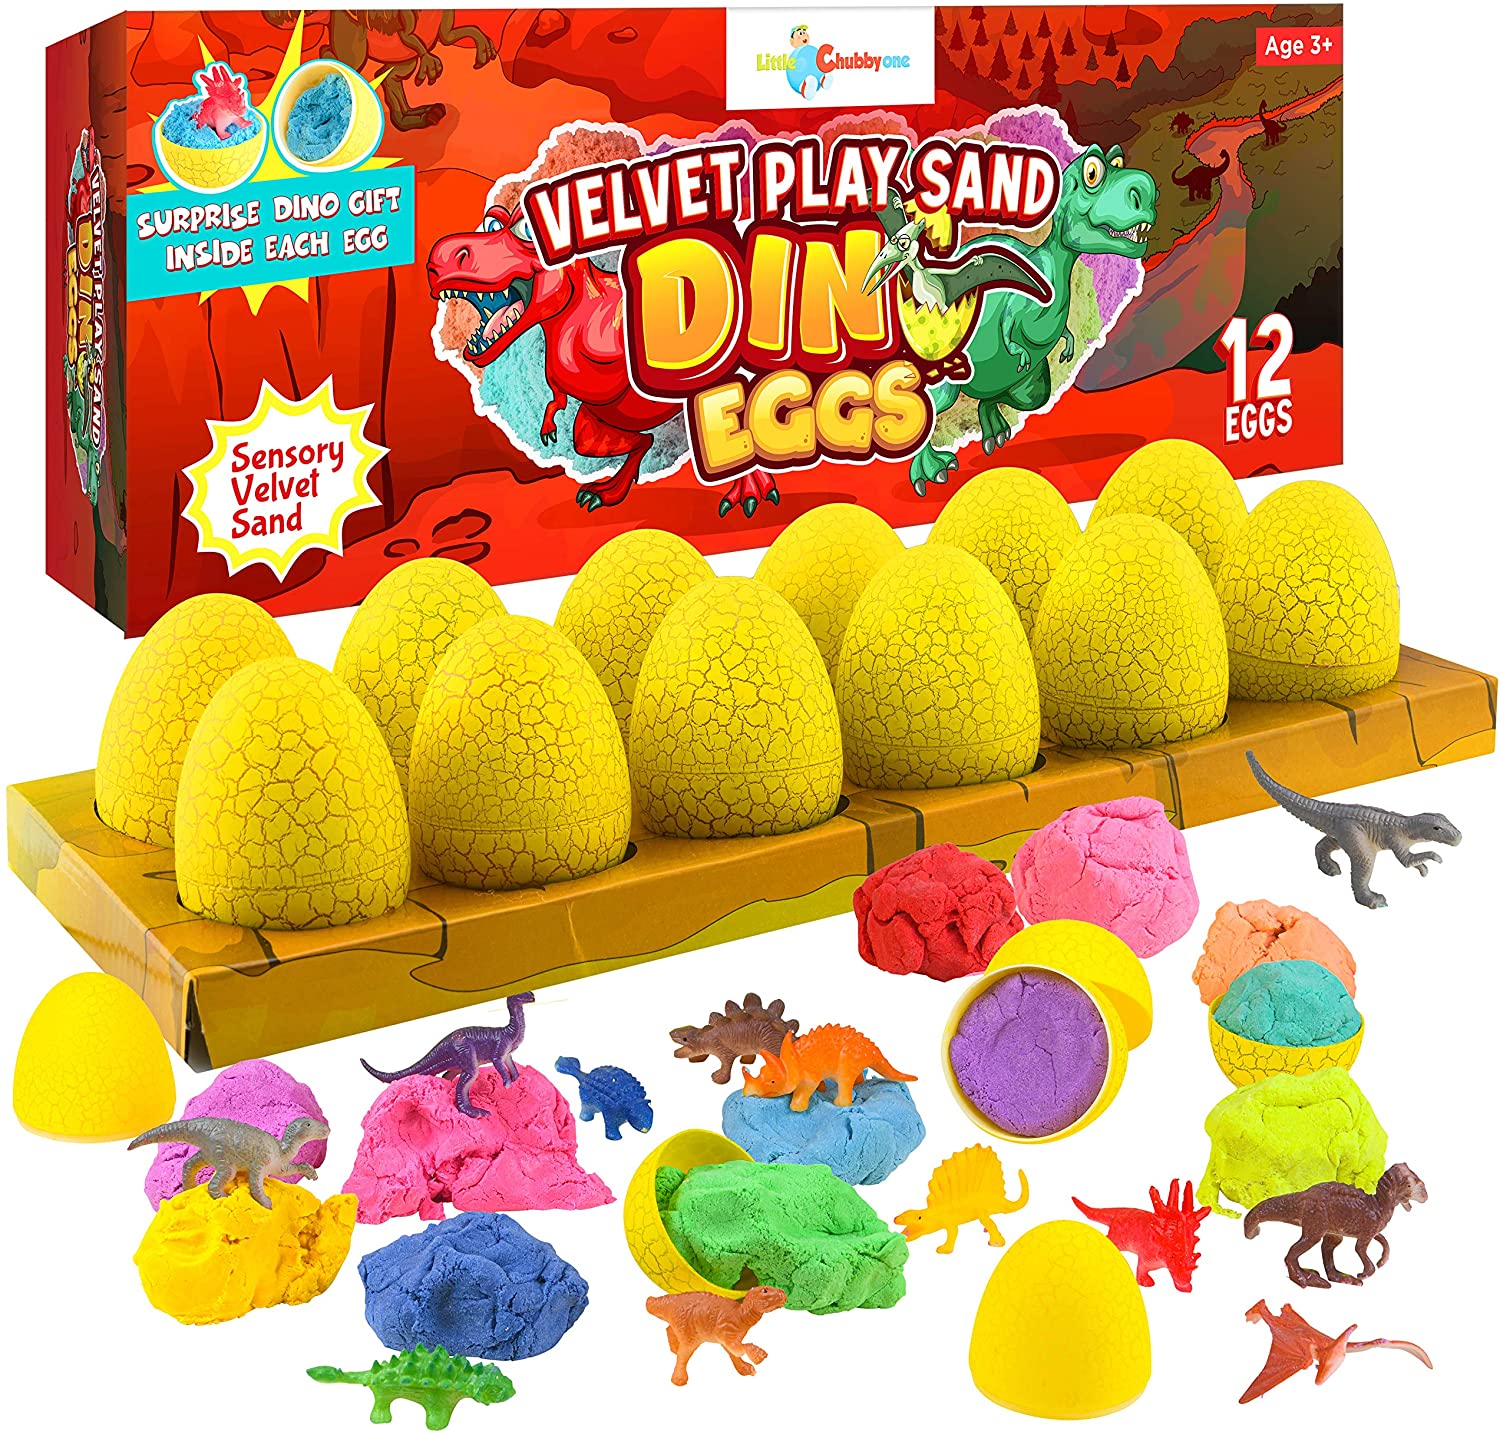 Toy Magic Sand Set Includes 12 Eggs with Sand Plus Dinosaur Surprise Sensory Toy for Girls and Boys Age 2 3 4 5 6 7 8 9 10 LITTLE CHUBBY ONE Kids Velvet Play Sand Dino Egg Set